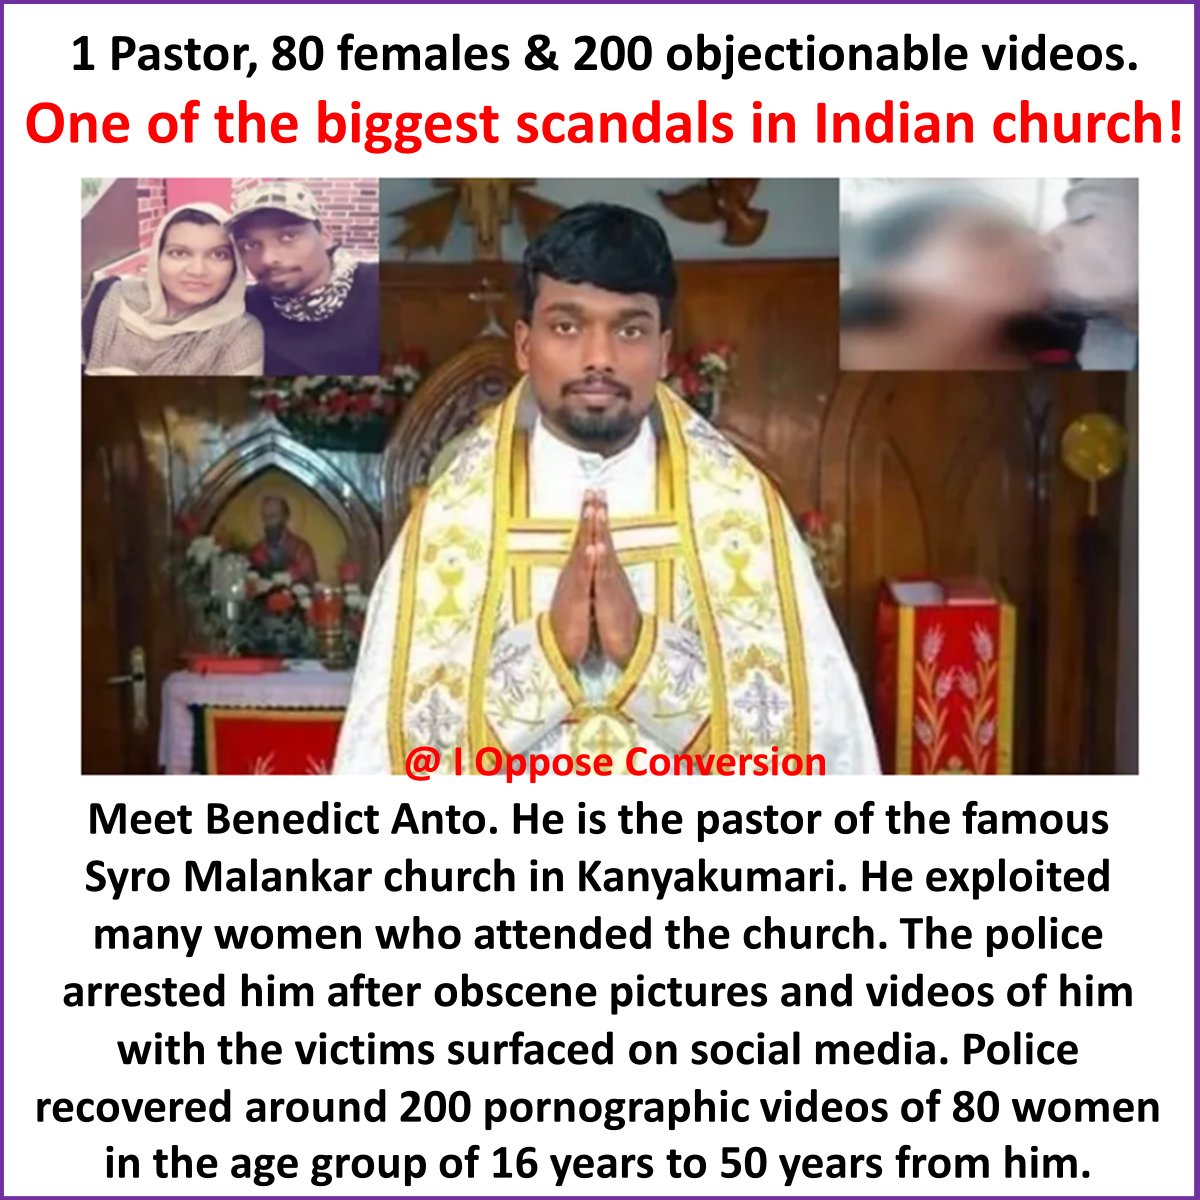 #TamilNadu: #Catholic priest Benedict Anto arrested for sexual abuse, intimate videos with several women leaked on social media. This is how #Christian pastors are spreading love of #Jesus in #India 

#NoConversion #Christianity #Hinduism #Sanatan #StopConversion #Hindu #Hindus